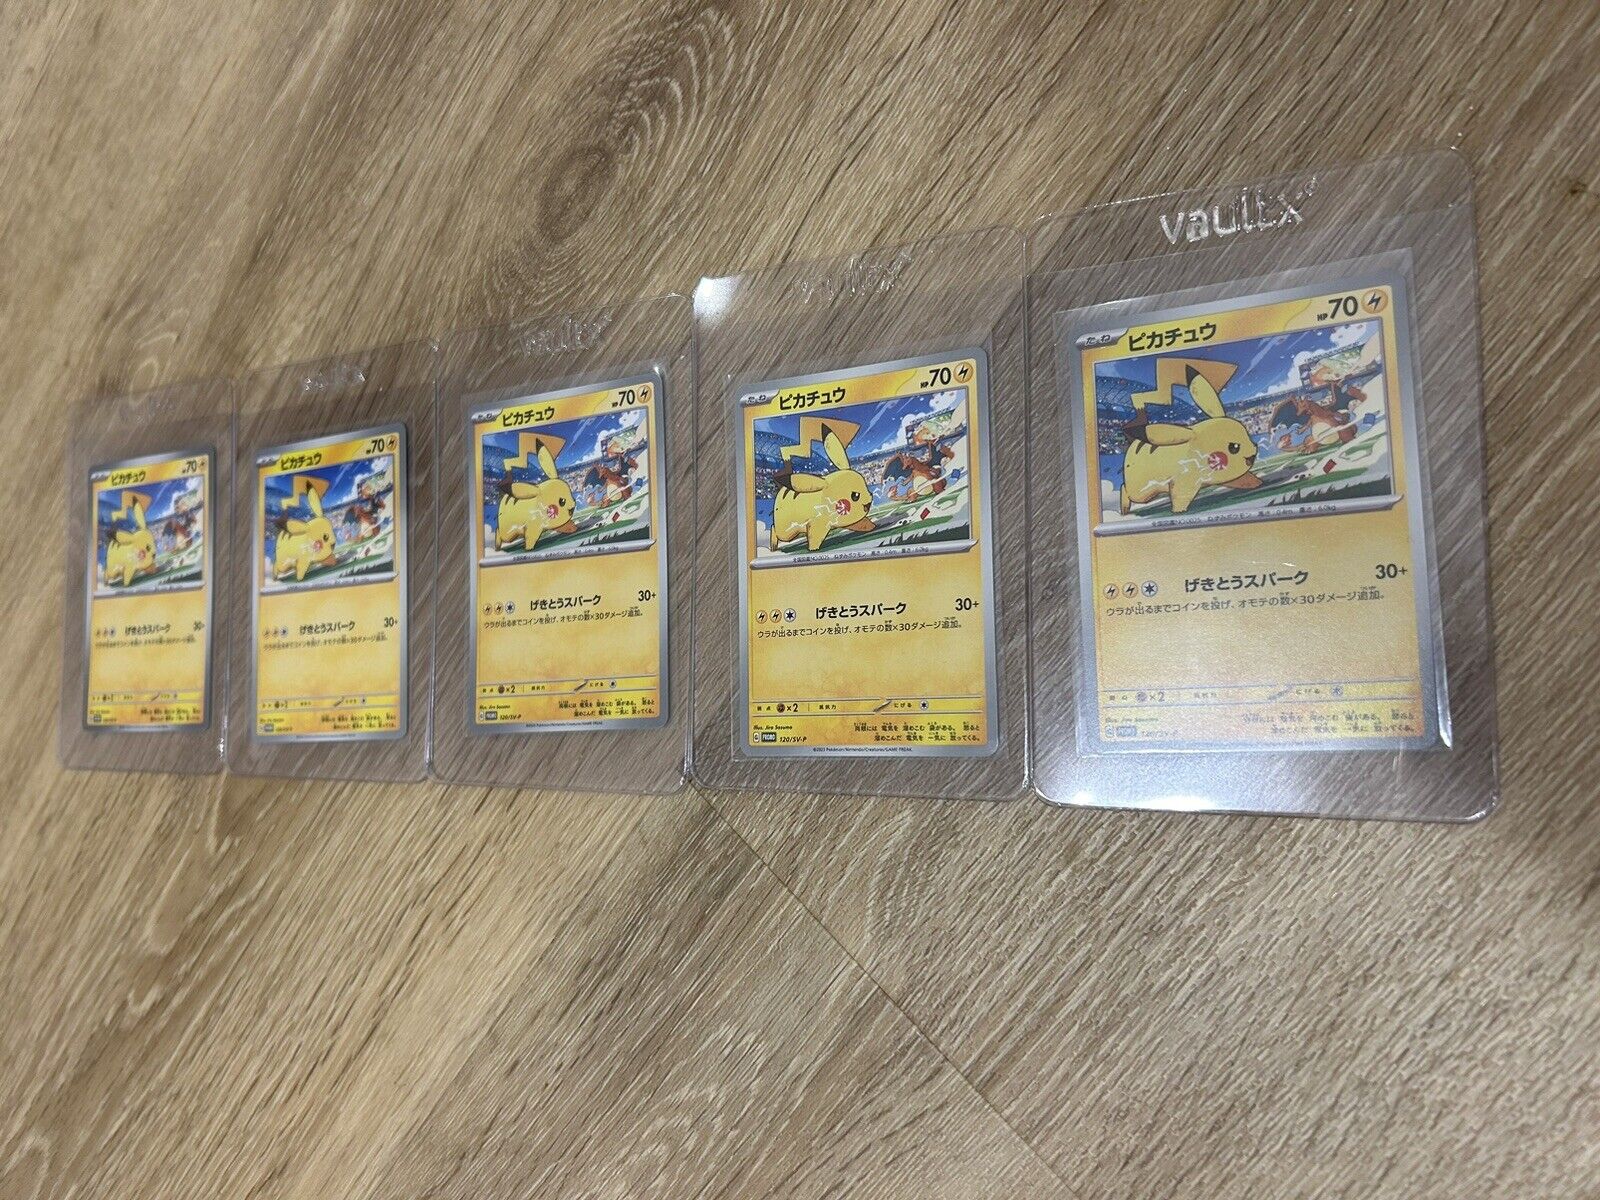 5 Raw Pikachu 120/SV-P Gym Event Campaign PROMO Japanese Pokemon Cards -Lot Of 5